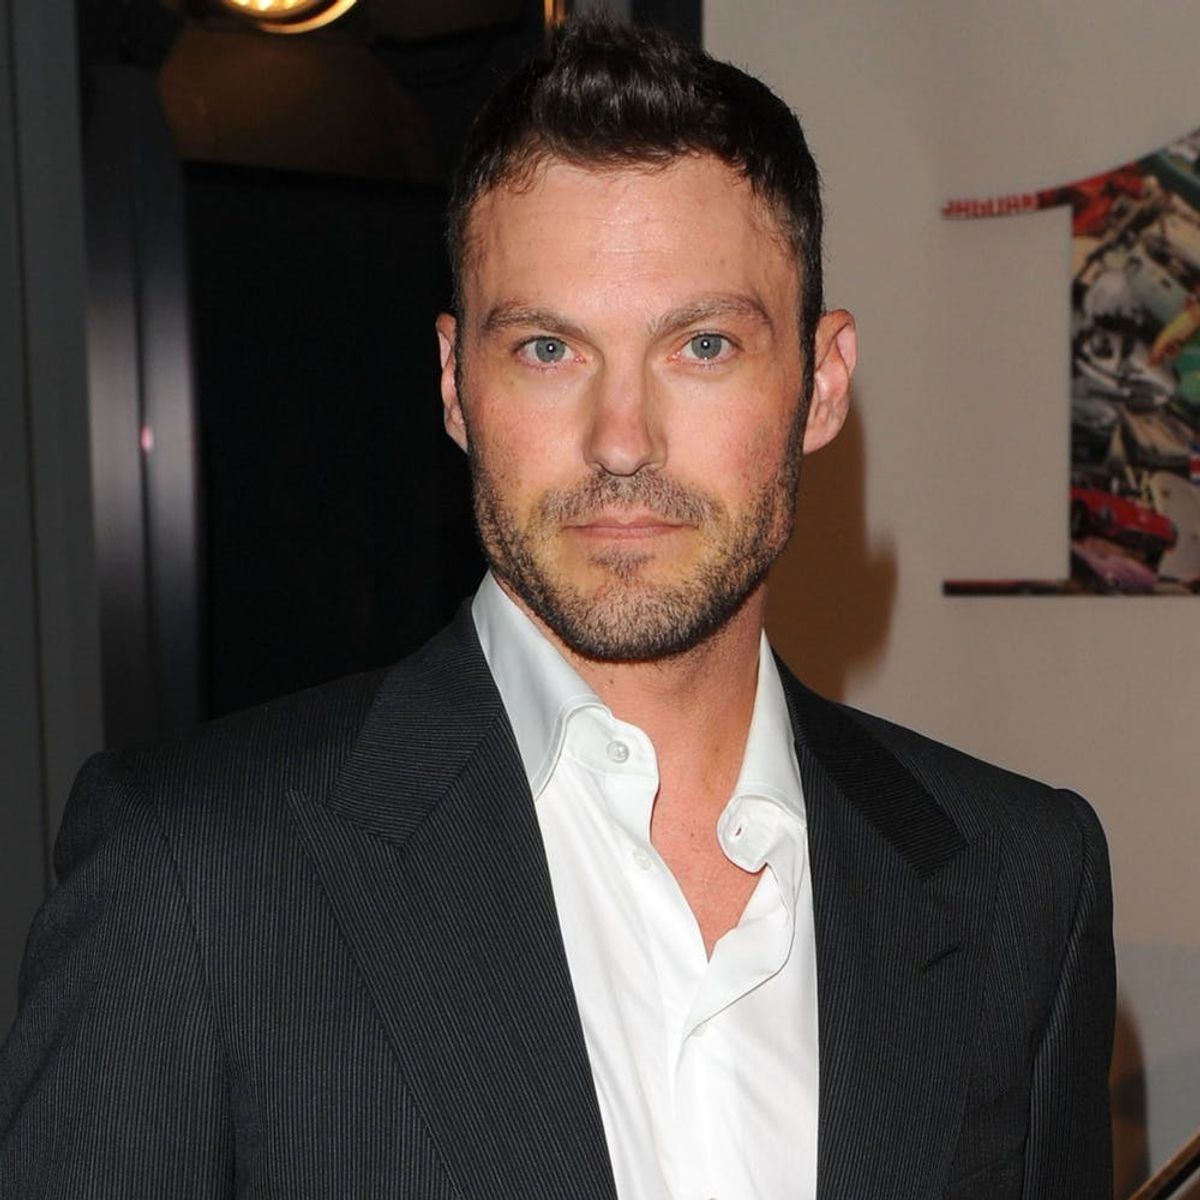 Brian Austin Green Doesn’t Care If People Don’t Like It When His 4-Year-Old Son Wears Dresses: “It’s His Life”